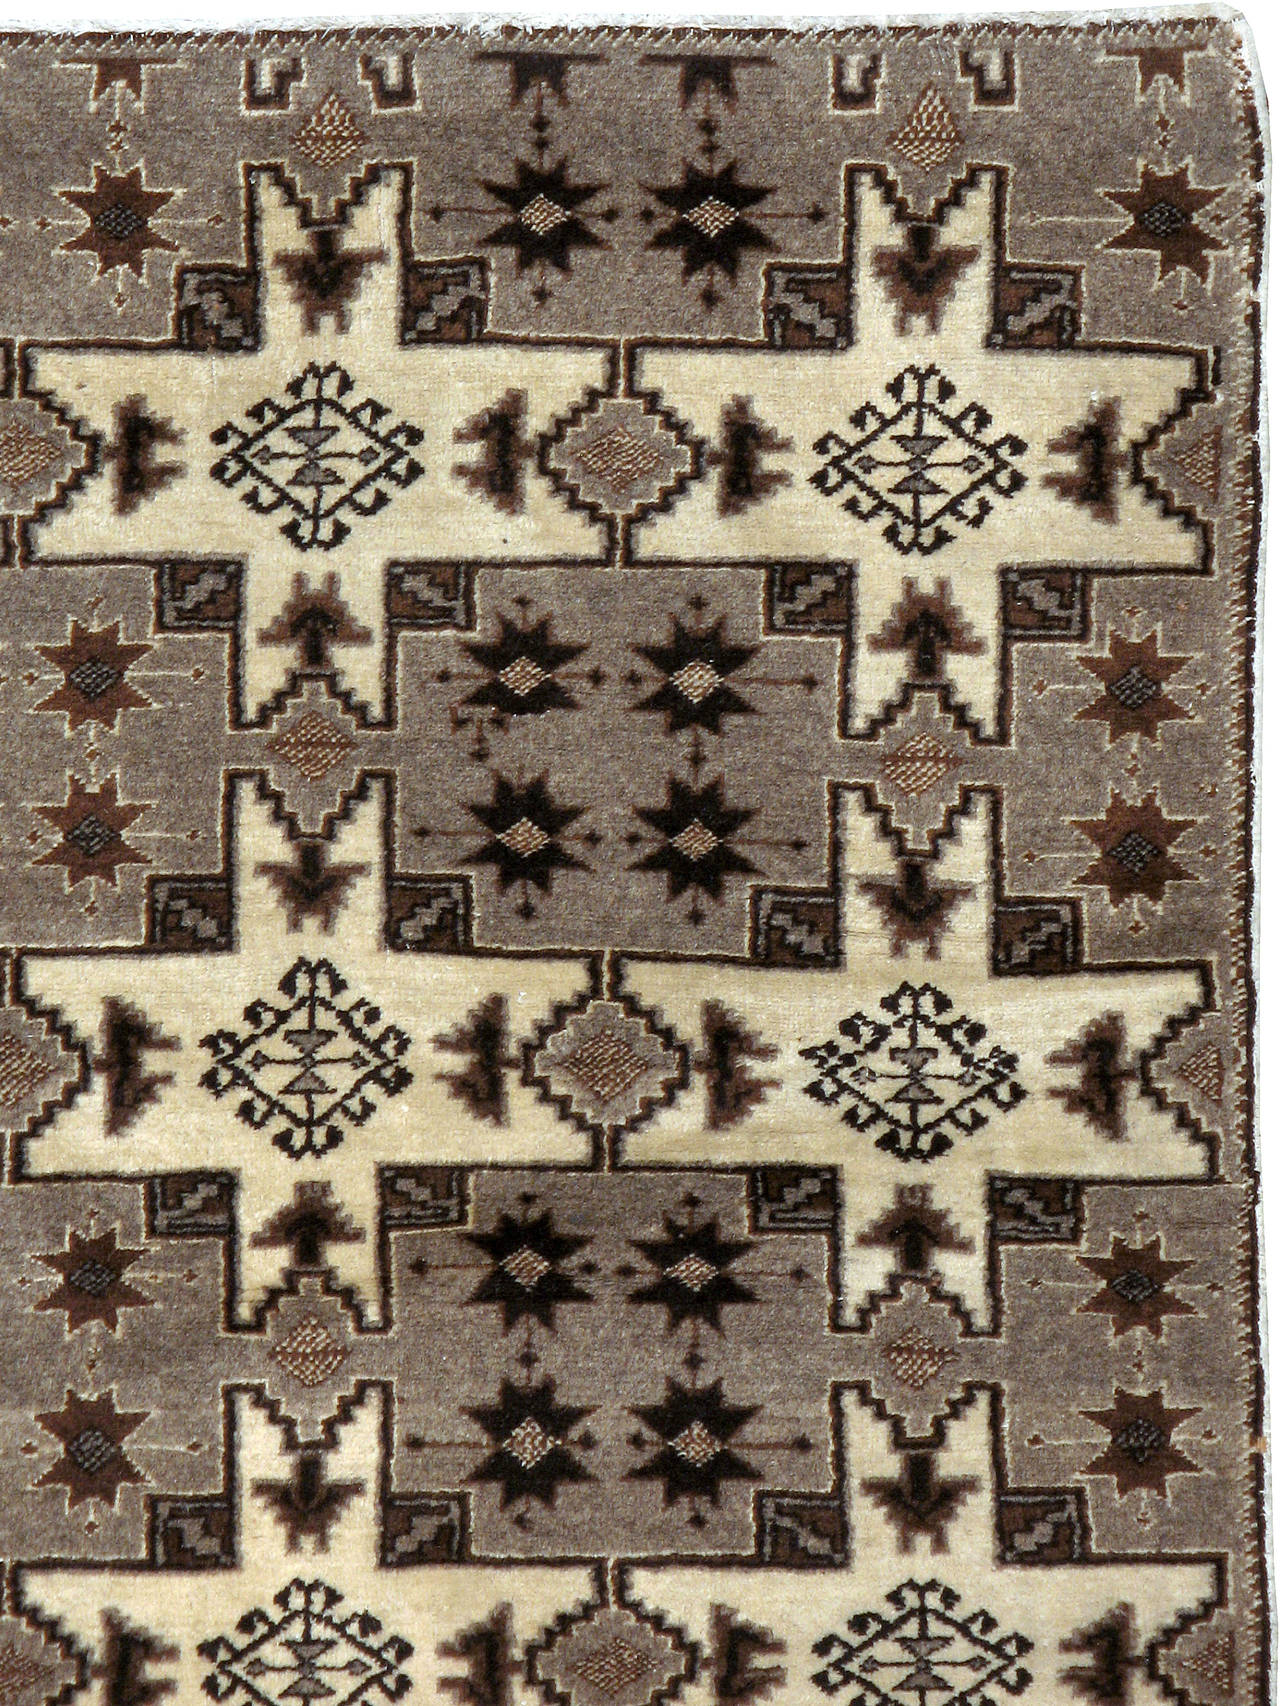 A vintage Turkish Tribal carpet from the second quarter of the 20th century.